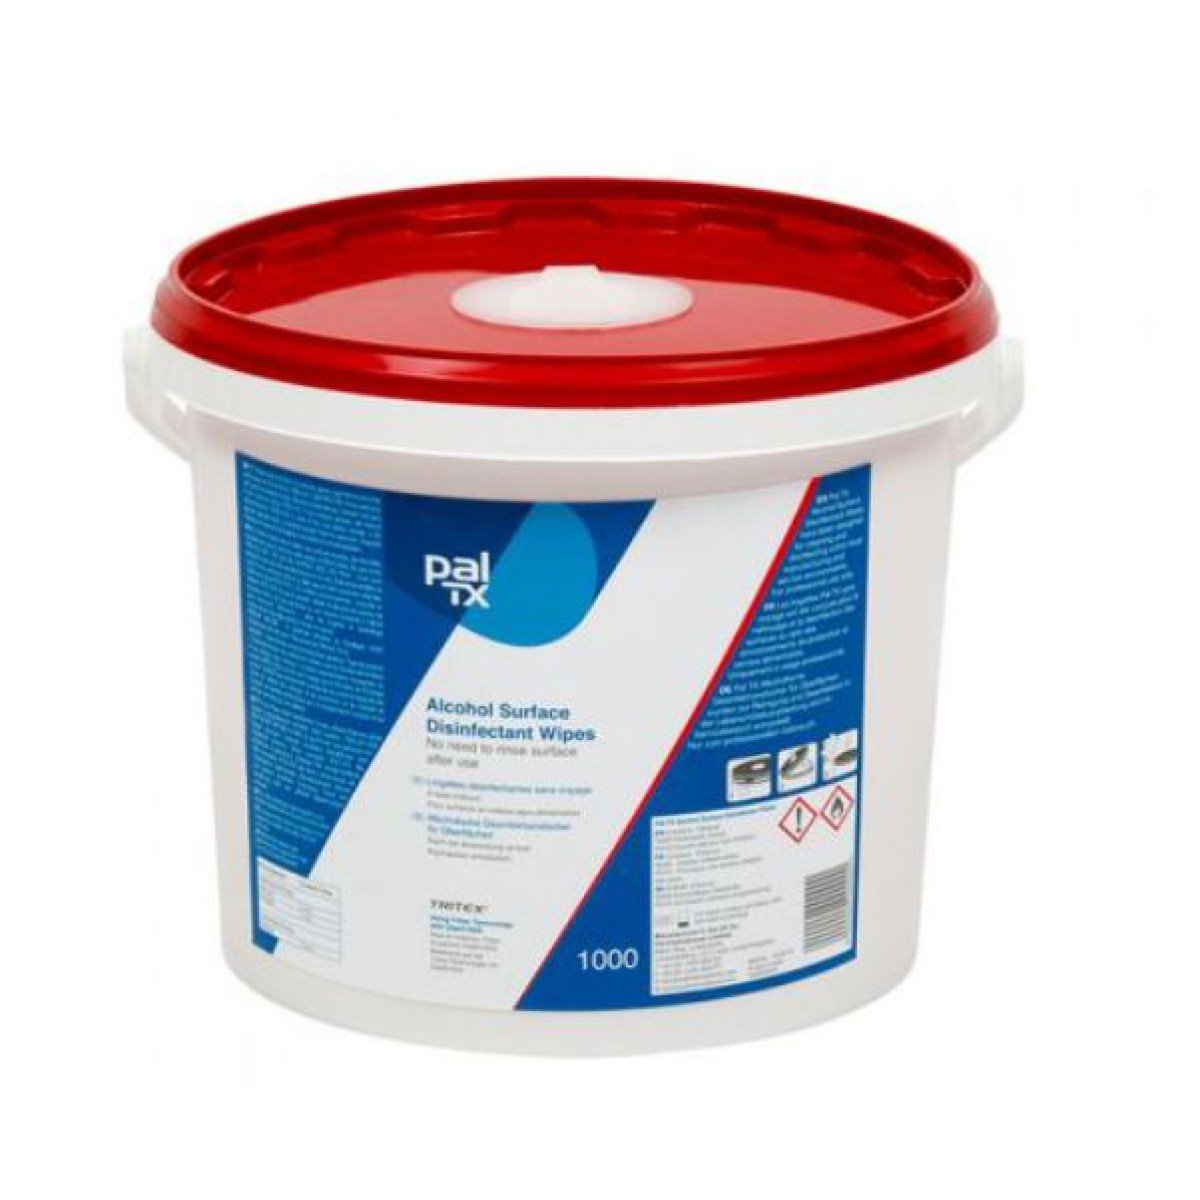 Pal Alcohol Disinfectant Wipes -  1000 sheets